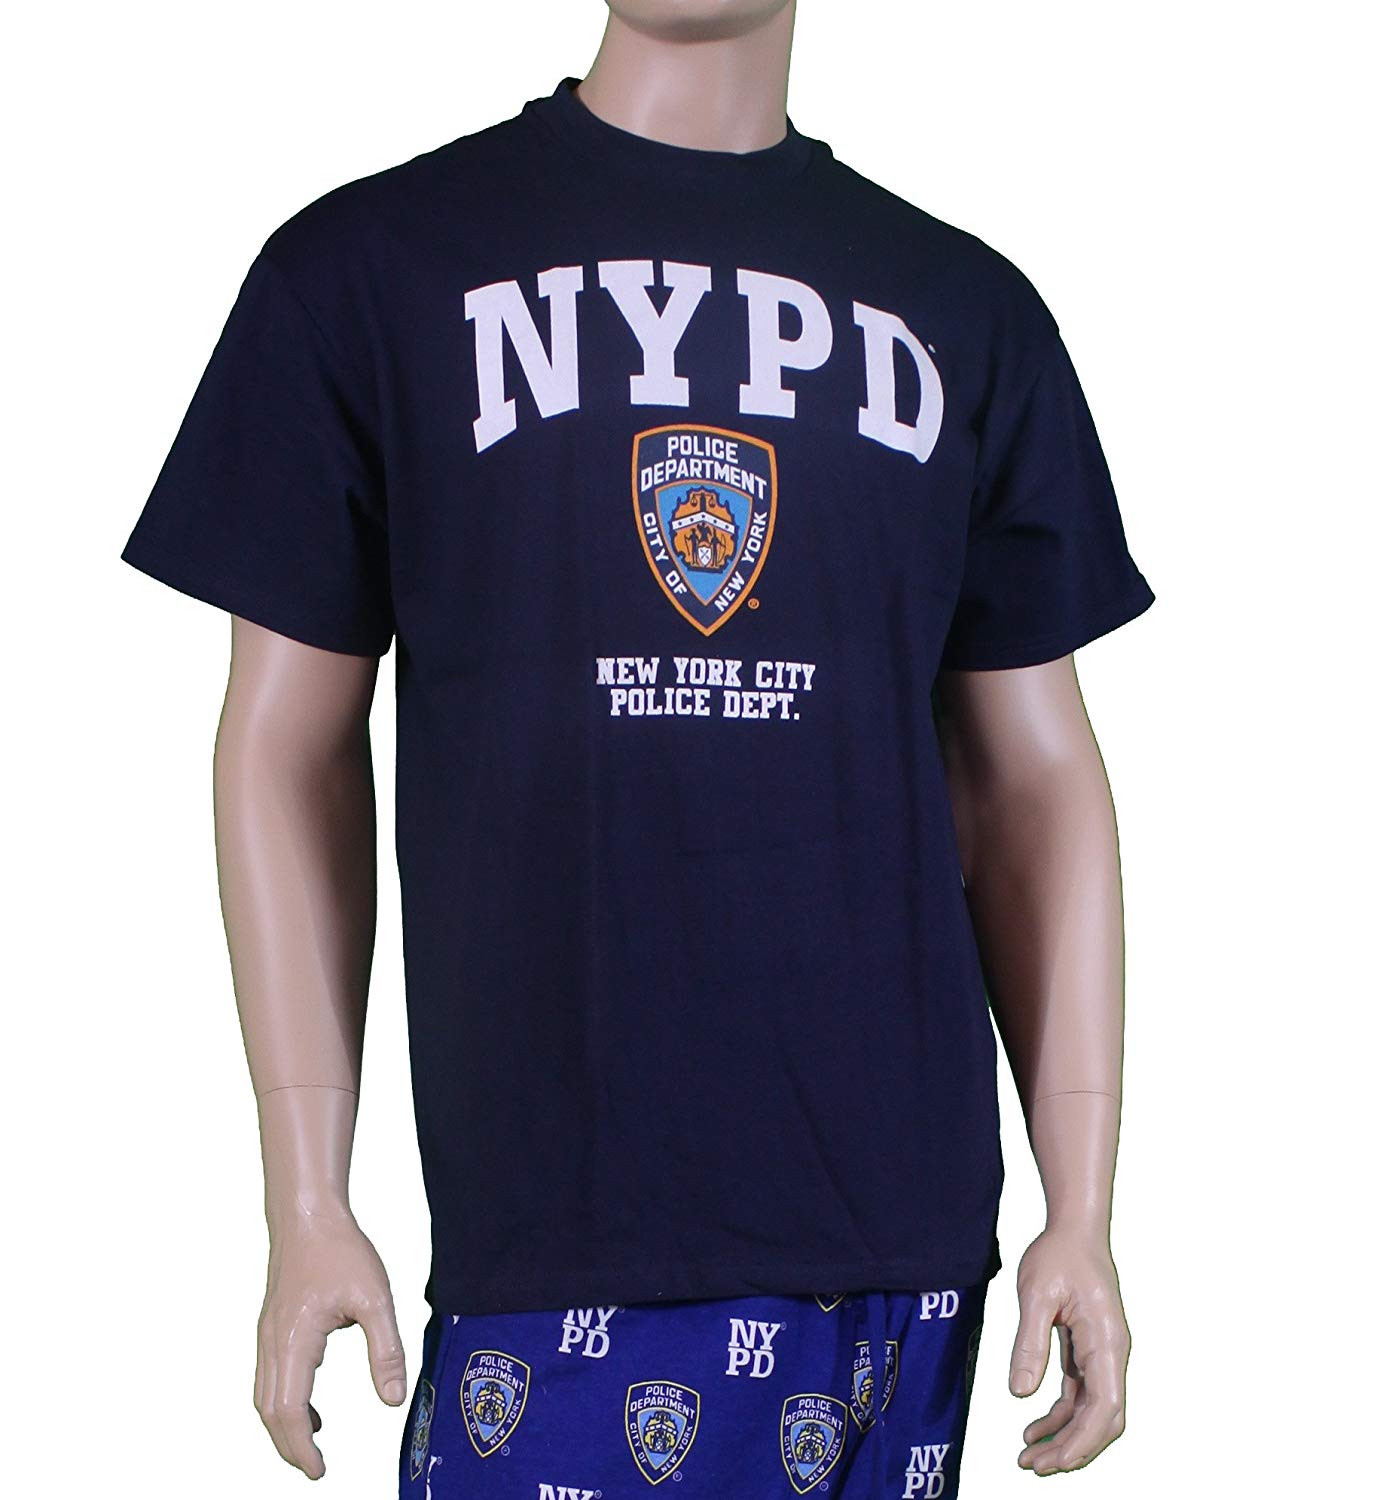 NYPD Logo - NYC FACTORY NYPD Short Sleeve with NYPD Logo and Shield